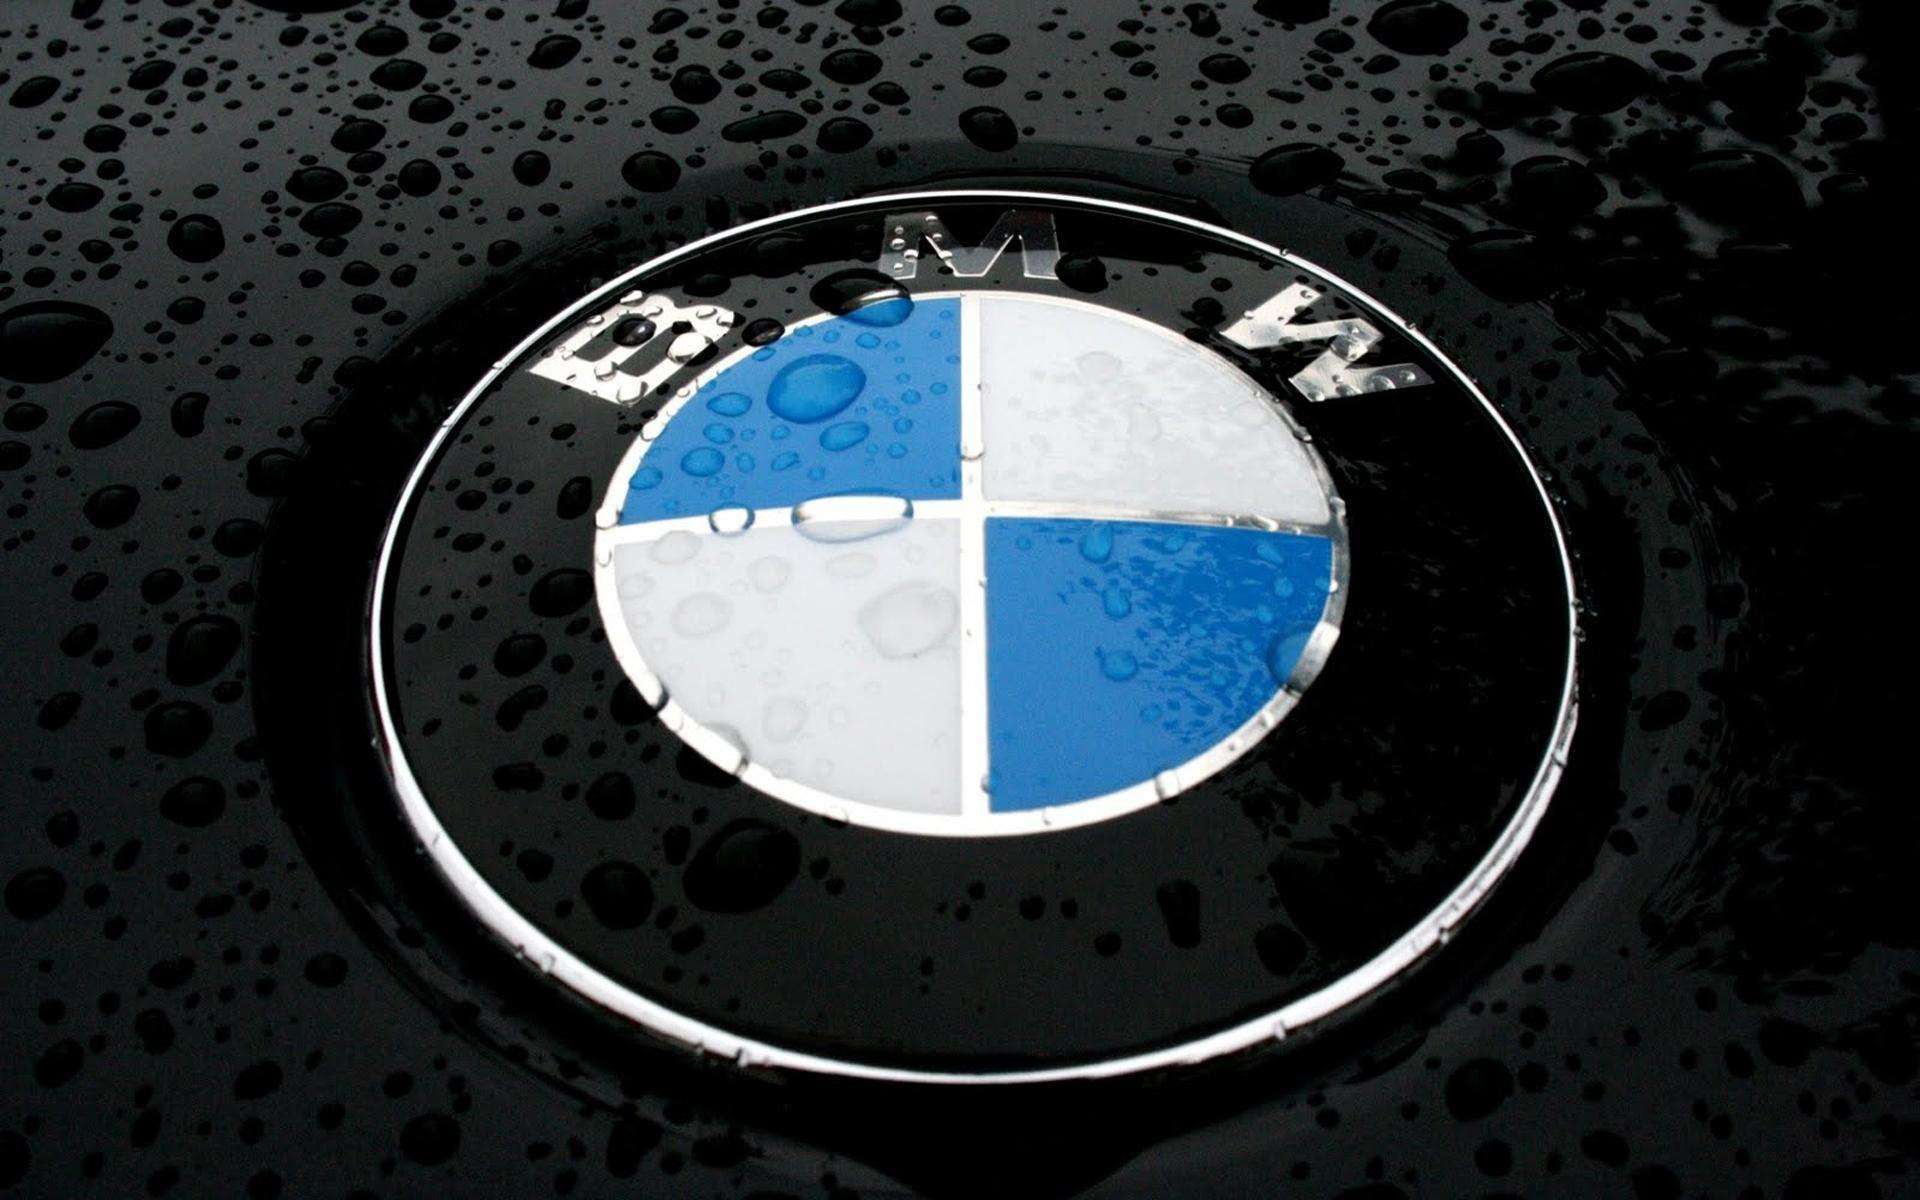 Bmw Logo Wallpaper Pictures Image